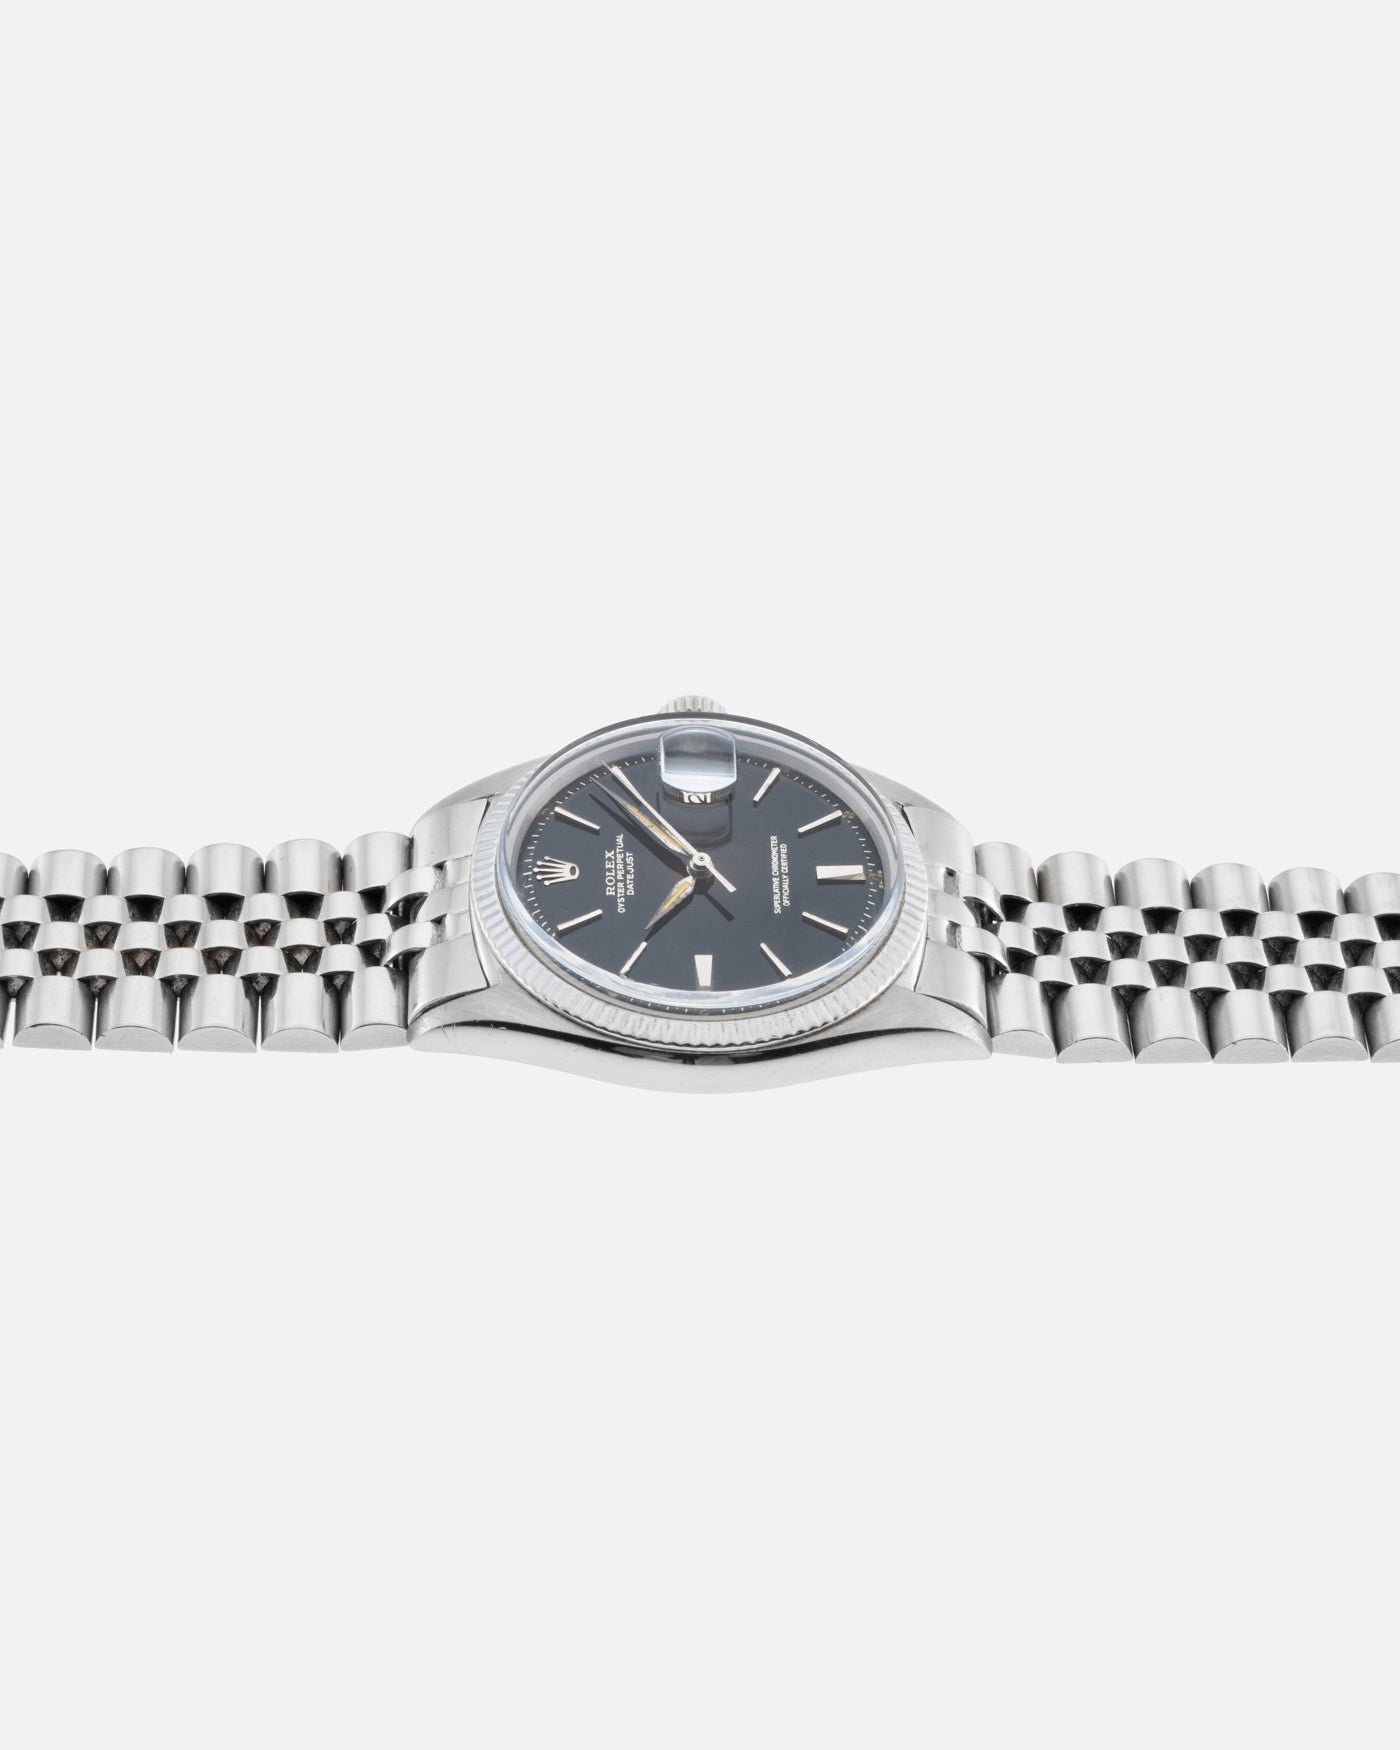 Rolex Datejust 1601 White Gold 'Tropical'